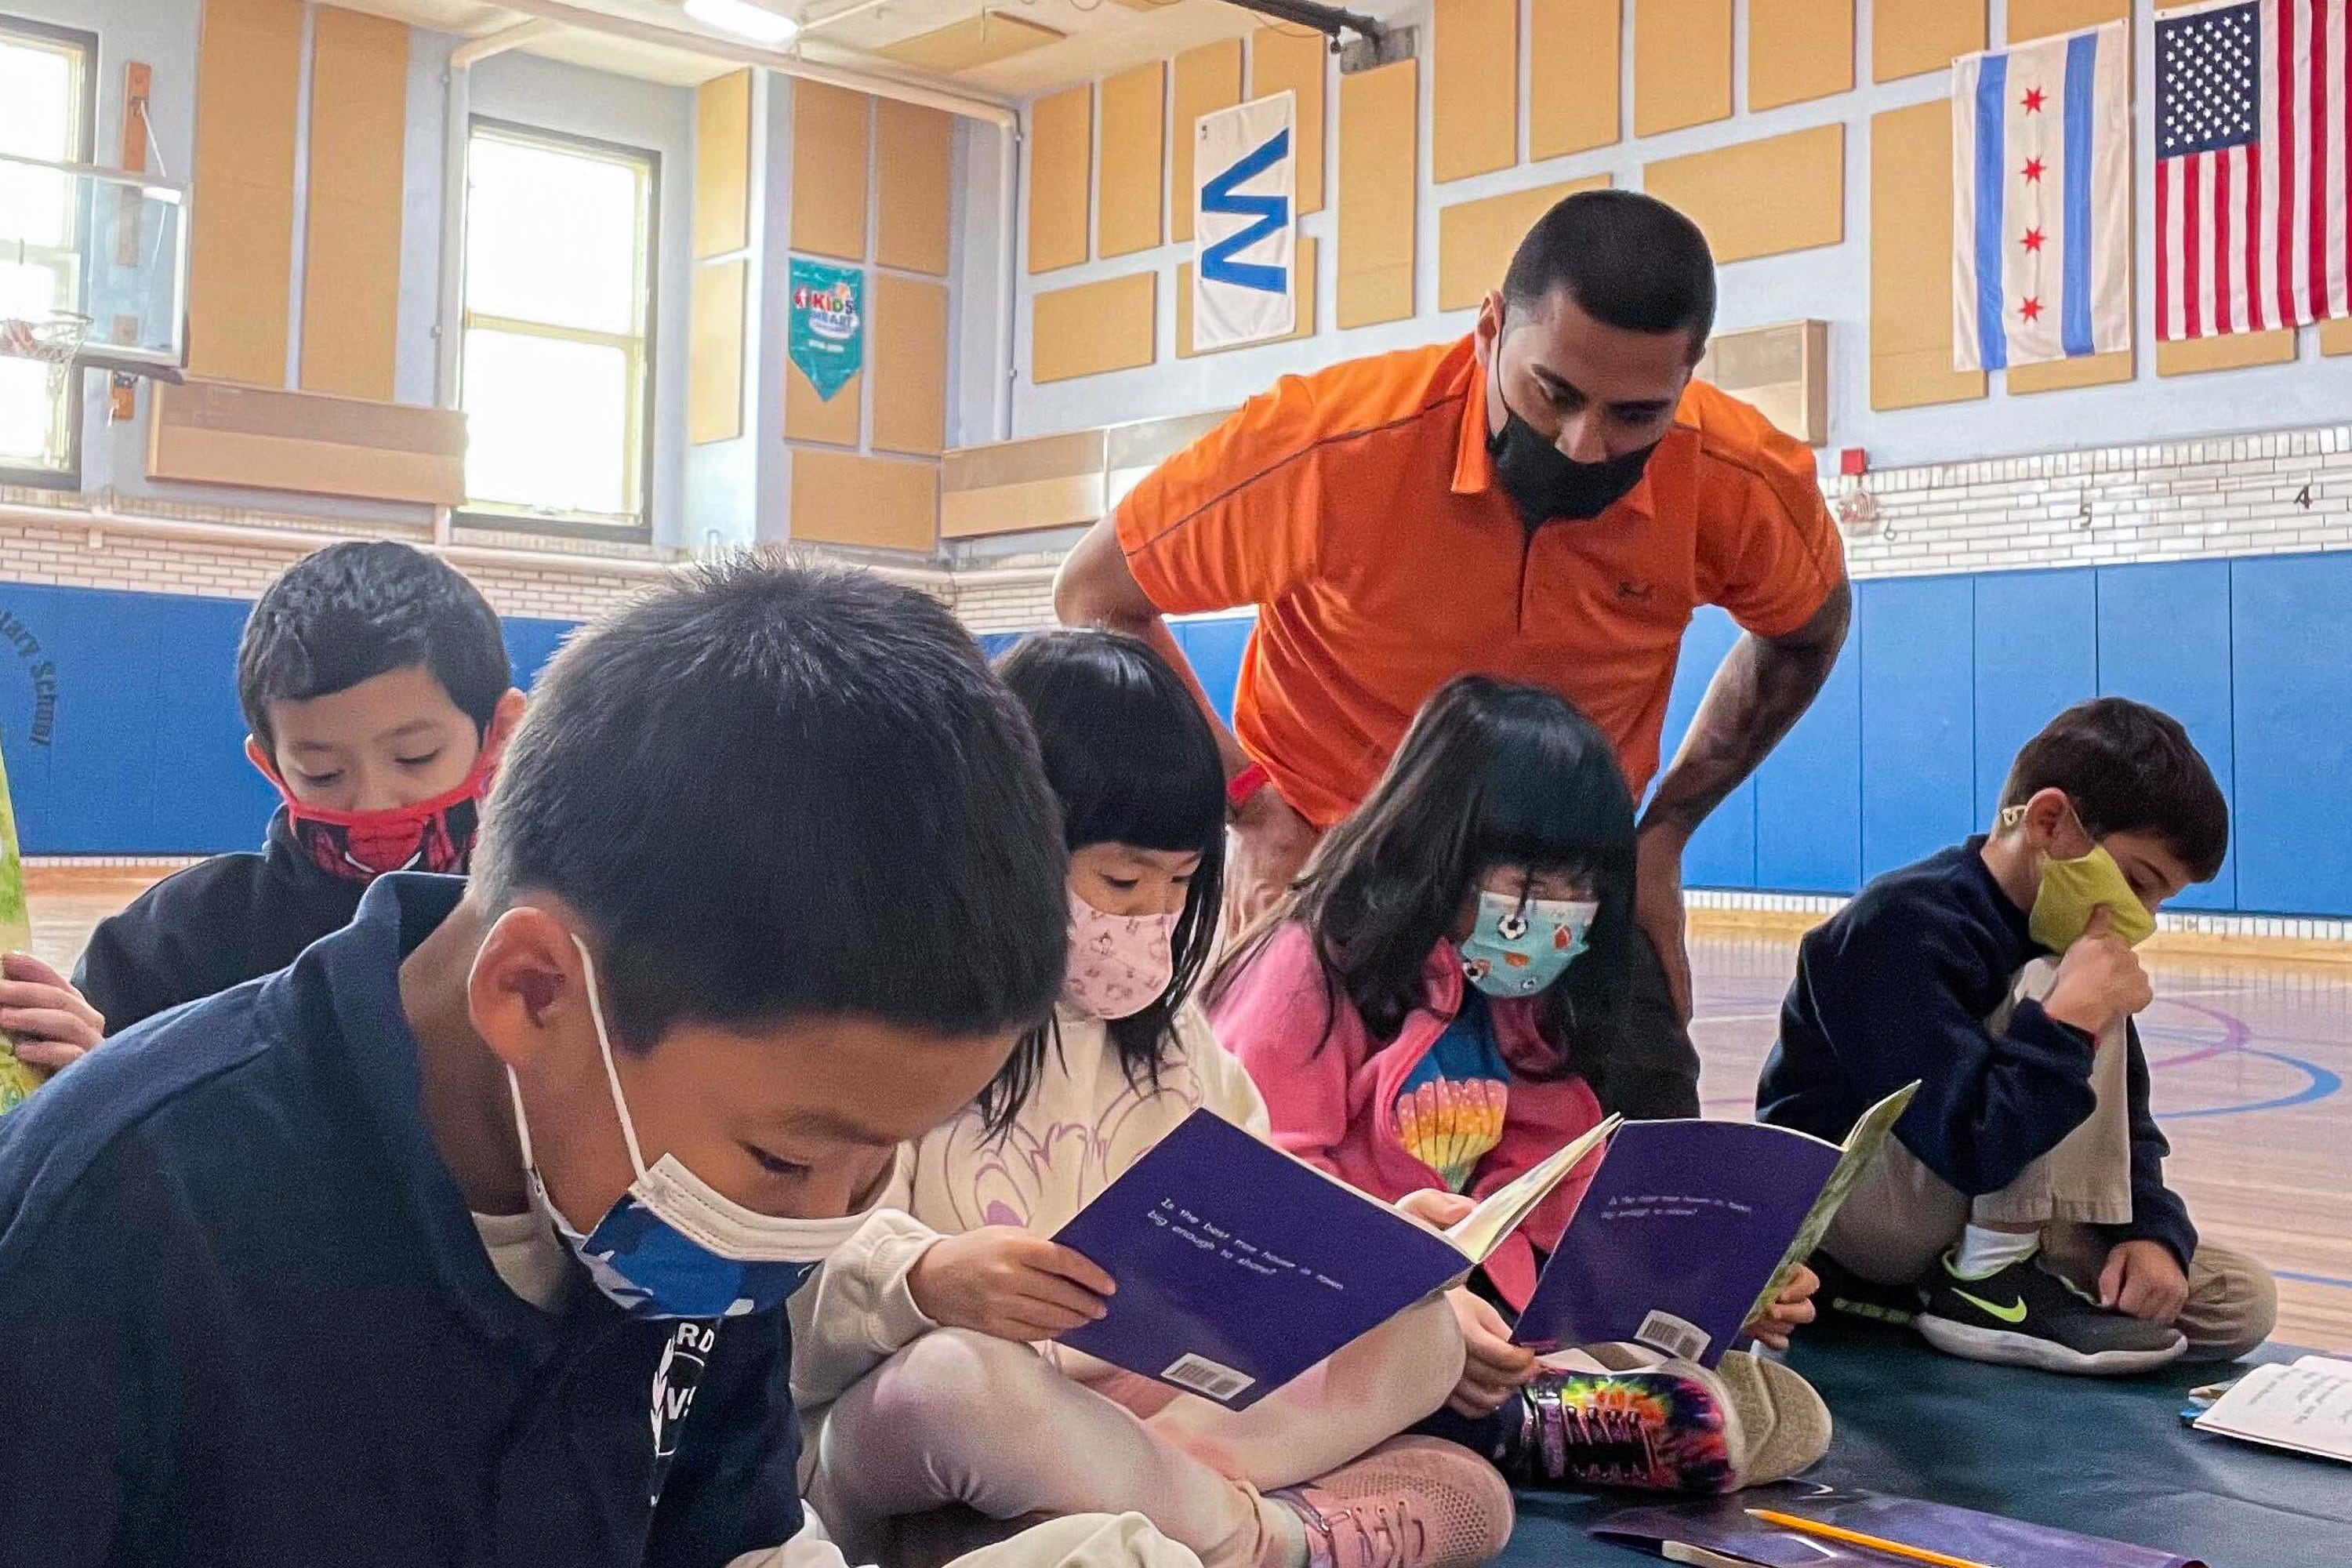 A teacher wearing an orange polo looks over the shoulders of several young students, who are reading in a school gymnasium and wearing protective masks.